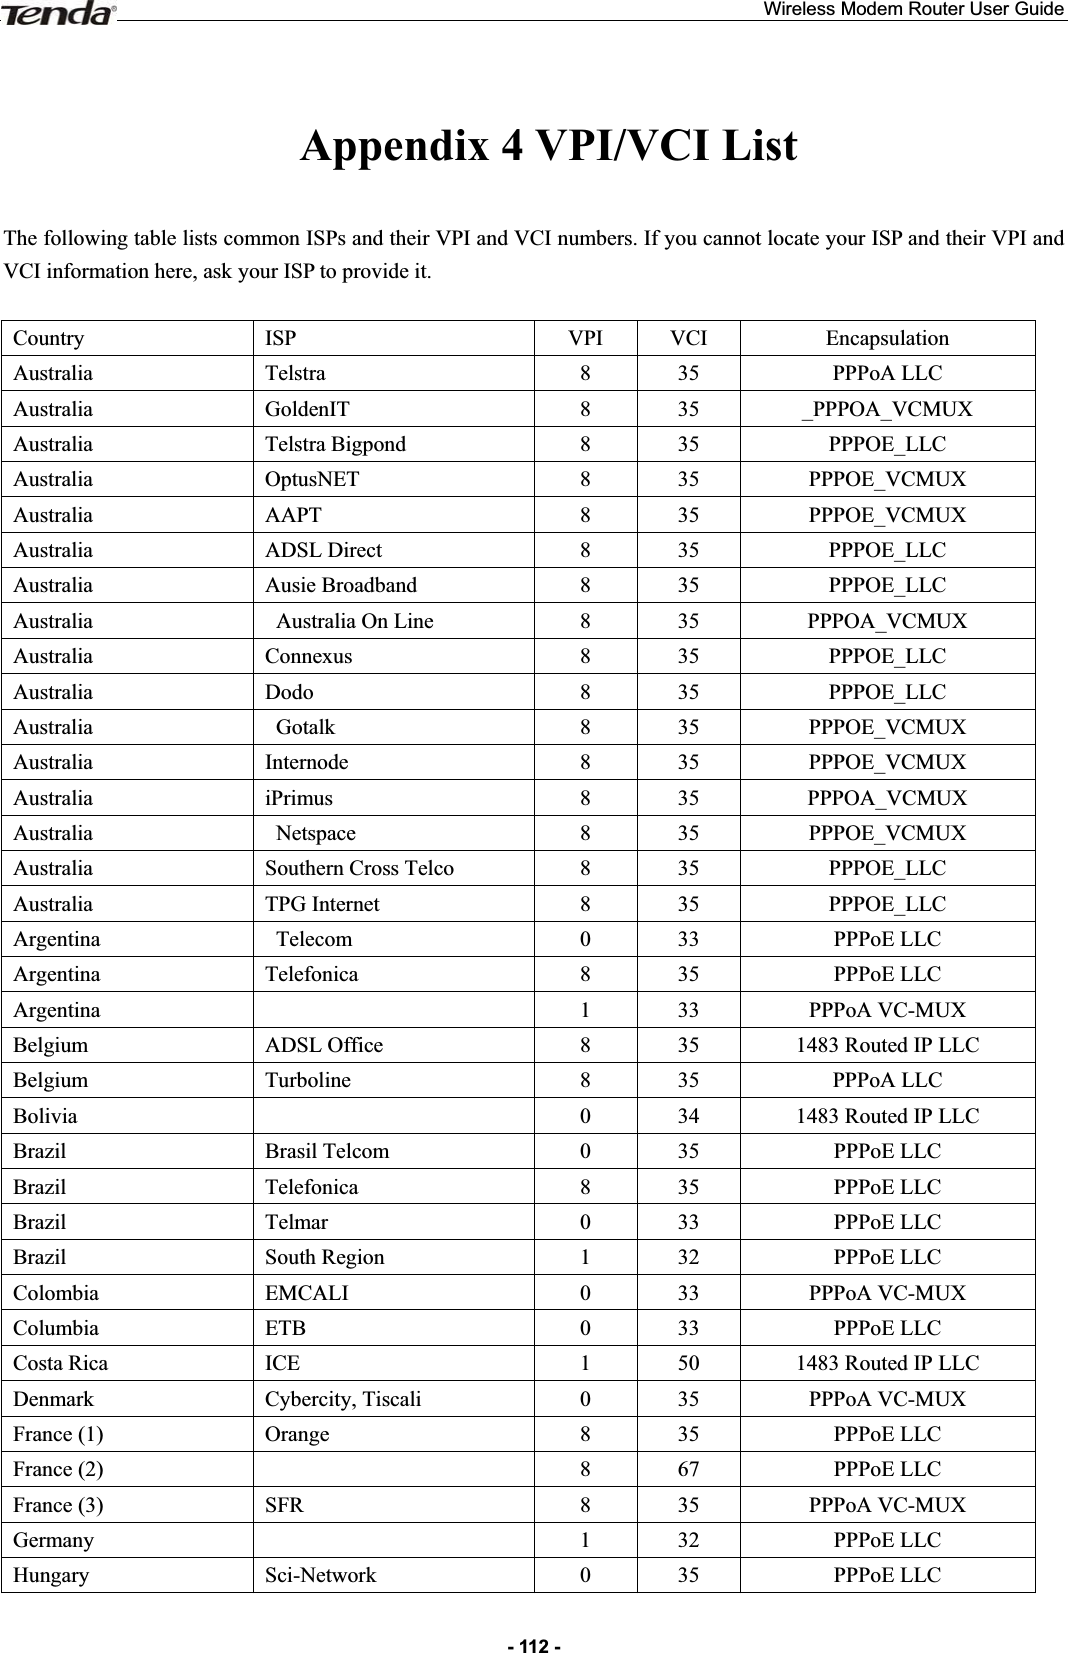 Wireless Modem Router User Guide- 112 -Appendix 4 VPI/VCI List The following table lists common ISPs and their VPI and VCI numbers. If you cannot locate your ISP and their VPI and VCI information here, ask your ISP to provide it. Country  ISP VPI  VCI Encapsulation Australia  Telstra  835  PPPoA LLC Australia   GoldenIT  835  _PPPOA_VCMUX Australia   Telstra Bigpond  835  PPPOE_LLCAustralia  OptusNET  835  PPPOE_VCMUX Australia   AAPT  835  PPPOE_VCMUX Australia   ADSL Direct  835  PPPOE_LLCAustralia   Ausie Broadband  835  PPPOE_LLCAustralia     Australia On Line  835  PPPOA_VCMUX Australia   Connexus  835  PPPOE_LLCAustralia   Dodo  835  PPPOE_LLCAustralia   Gotalk  835  PPPOE_VCMUX Australia   Internode 835  PPPOE_VCMUX Australia   iPrimus  835  PPPOA_VCMUX Australia    Netspace  835  PPPOE_VCMUX Australia   Southern Cross Telco  835  PPPOE_LLCAustralia   TPG Internet  835  PPPOE_LLCArgentina   Telecom  033  PPPoE LLC Argentina   Telefonica 8 35  PPPoE LLC Argentina  133  PPPoA VC-MUX Belgium  ADSL Office  835  1483 Routed IP LLC Belgium  Turboline 835  PPPoA LLC Bolivia  034  1483 Routed IP LLC Brazil   Brasil Telcom  035  PPPoE LLC Brazil   Telefonica 8 35  PPPoE LLC Brazil  Telmar  033  PPPoE LLC Brazil   South Region  132  PPPoE LLC Colombia   EMCALI 033  PPPoA VC-MUX Columbia   ETB 033  PPPoE LLC Costa Rica  ICE 150  1483 Routed IP LLC Denmark  Cybercity, Tiscali  035  PPPoA VC-MUX France (1)  Orange  835  PPPoE LLC France (2)  867  PPPoE LLC France (3)  SFR 835  PPPoA VC-MUX Germany  132  PPPoE LLC Hungary   Sci-Network  035  PPPoE LLC 